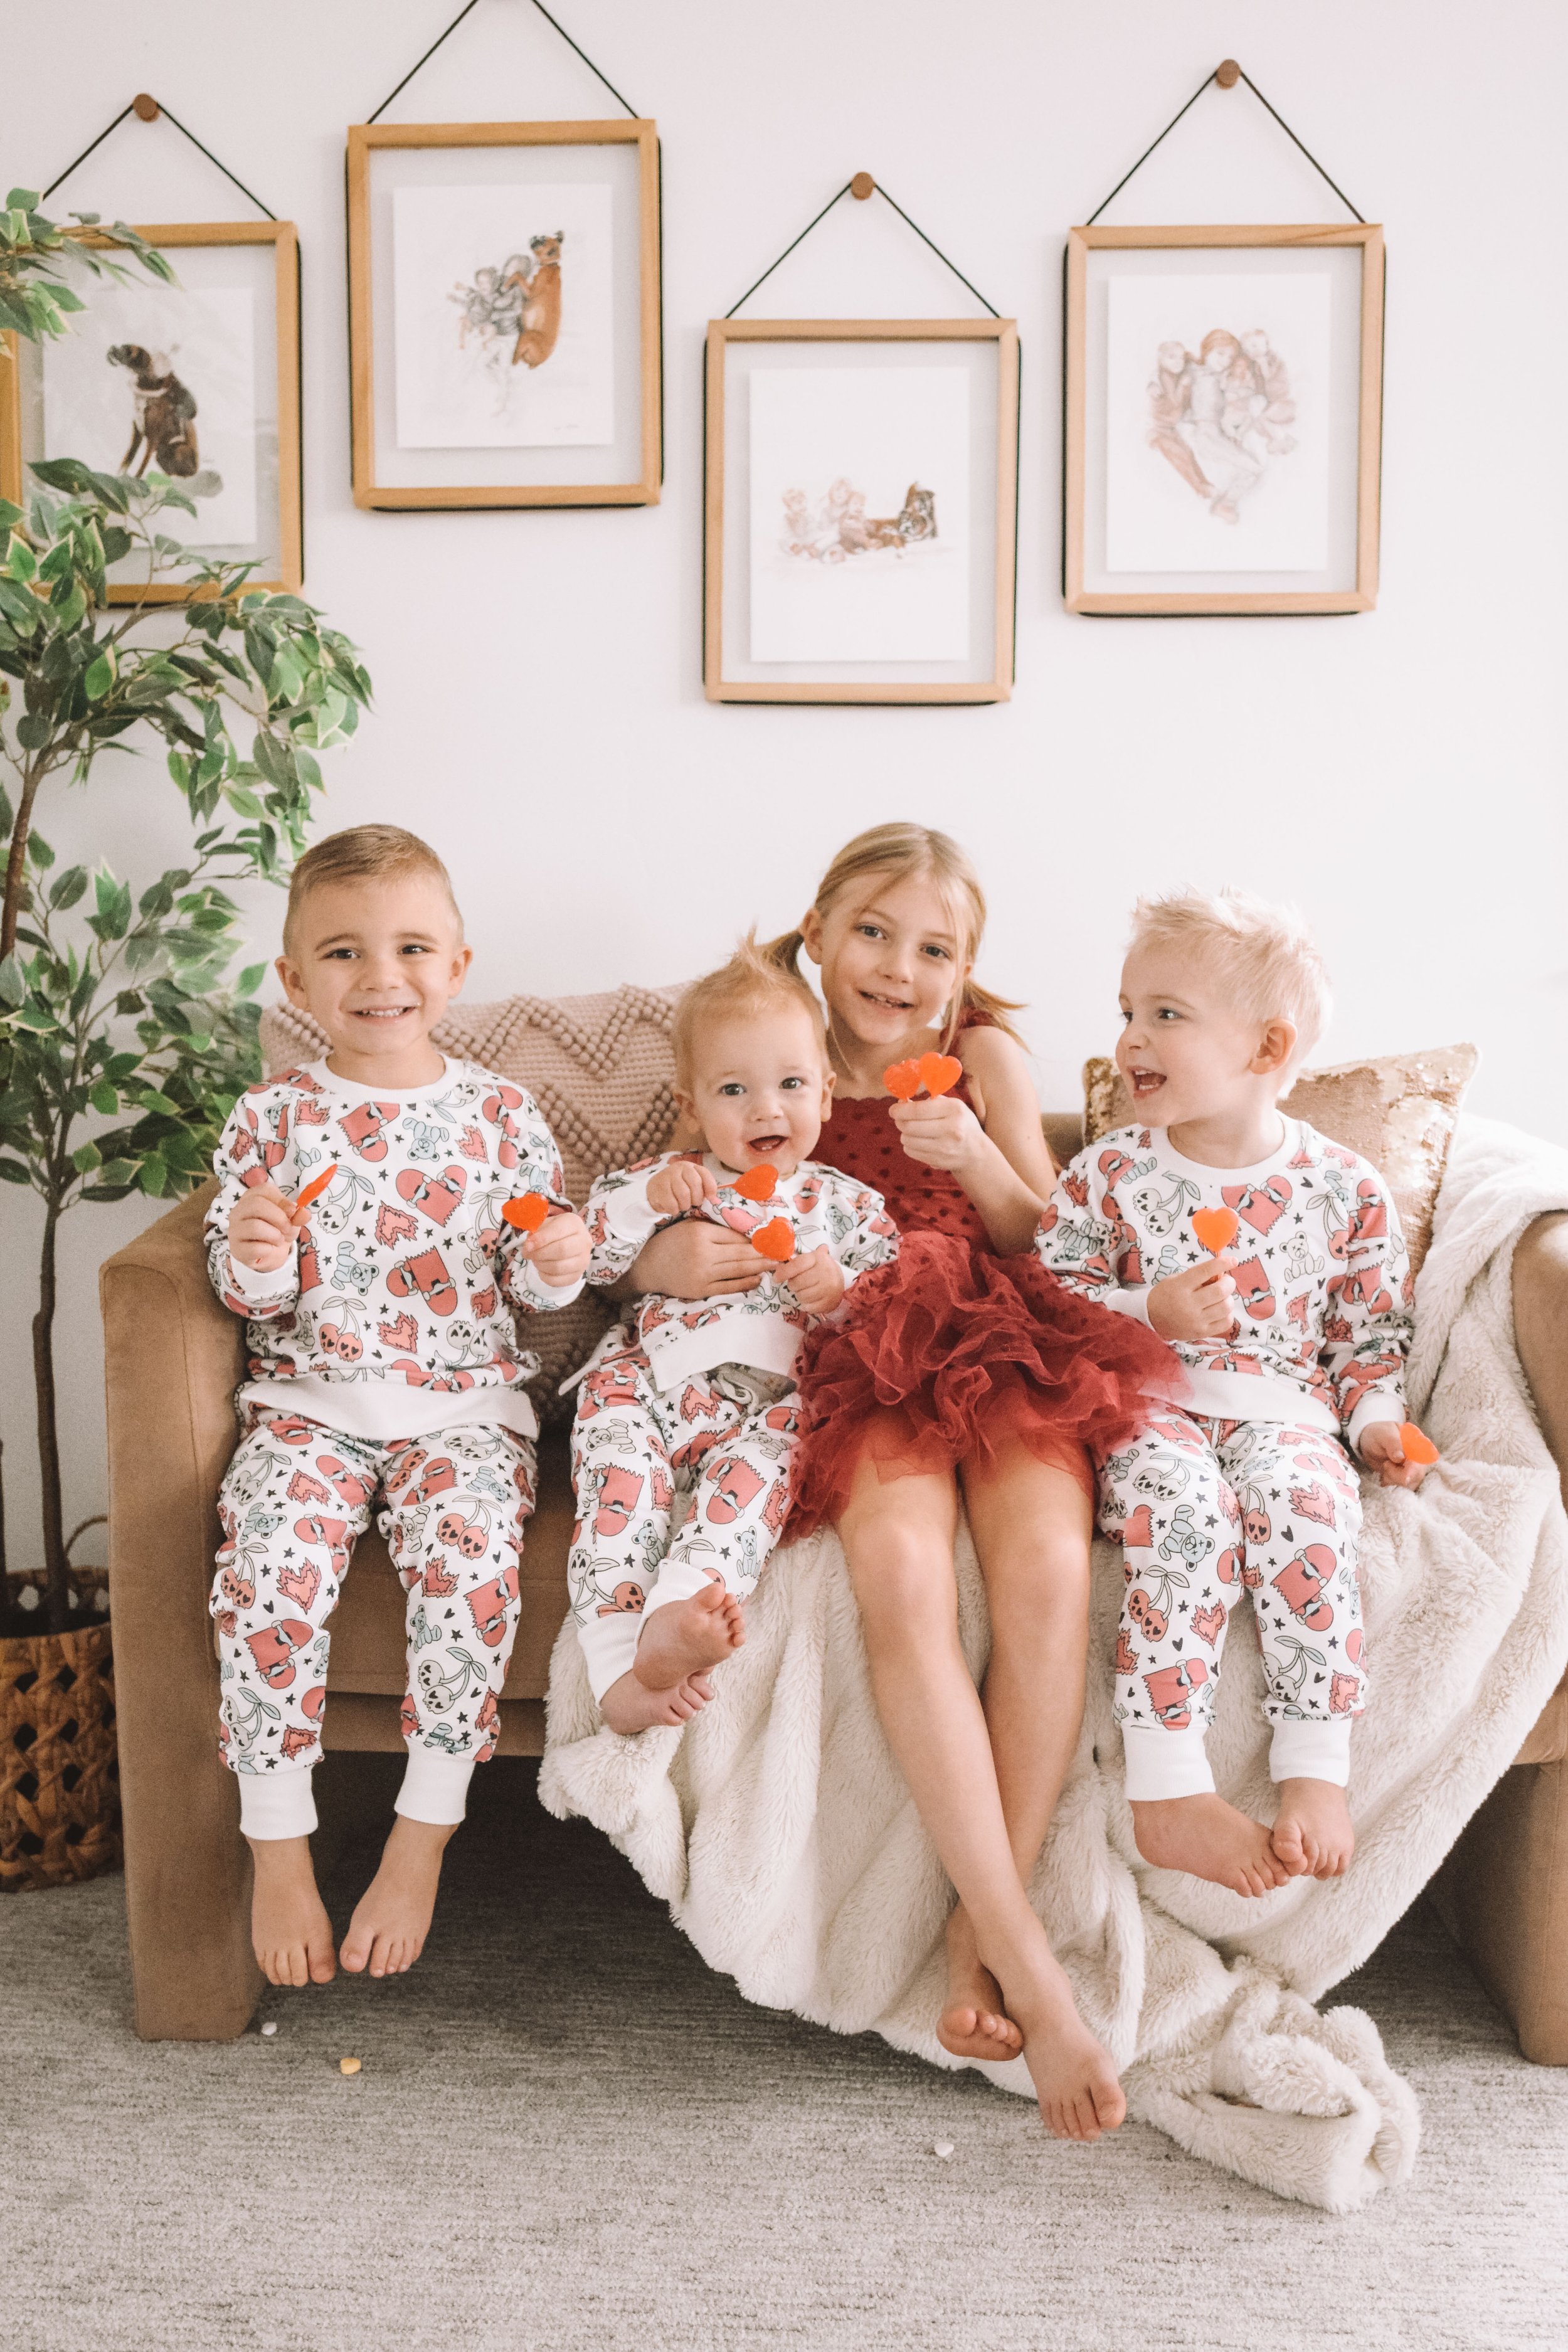 Kids Valentine's Day Sweatsuits &amp; Red Tutu - Bums &amp; Roses